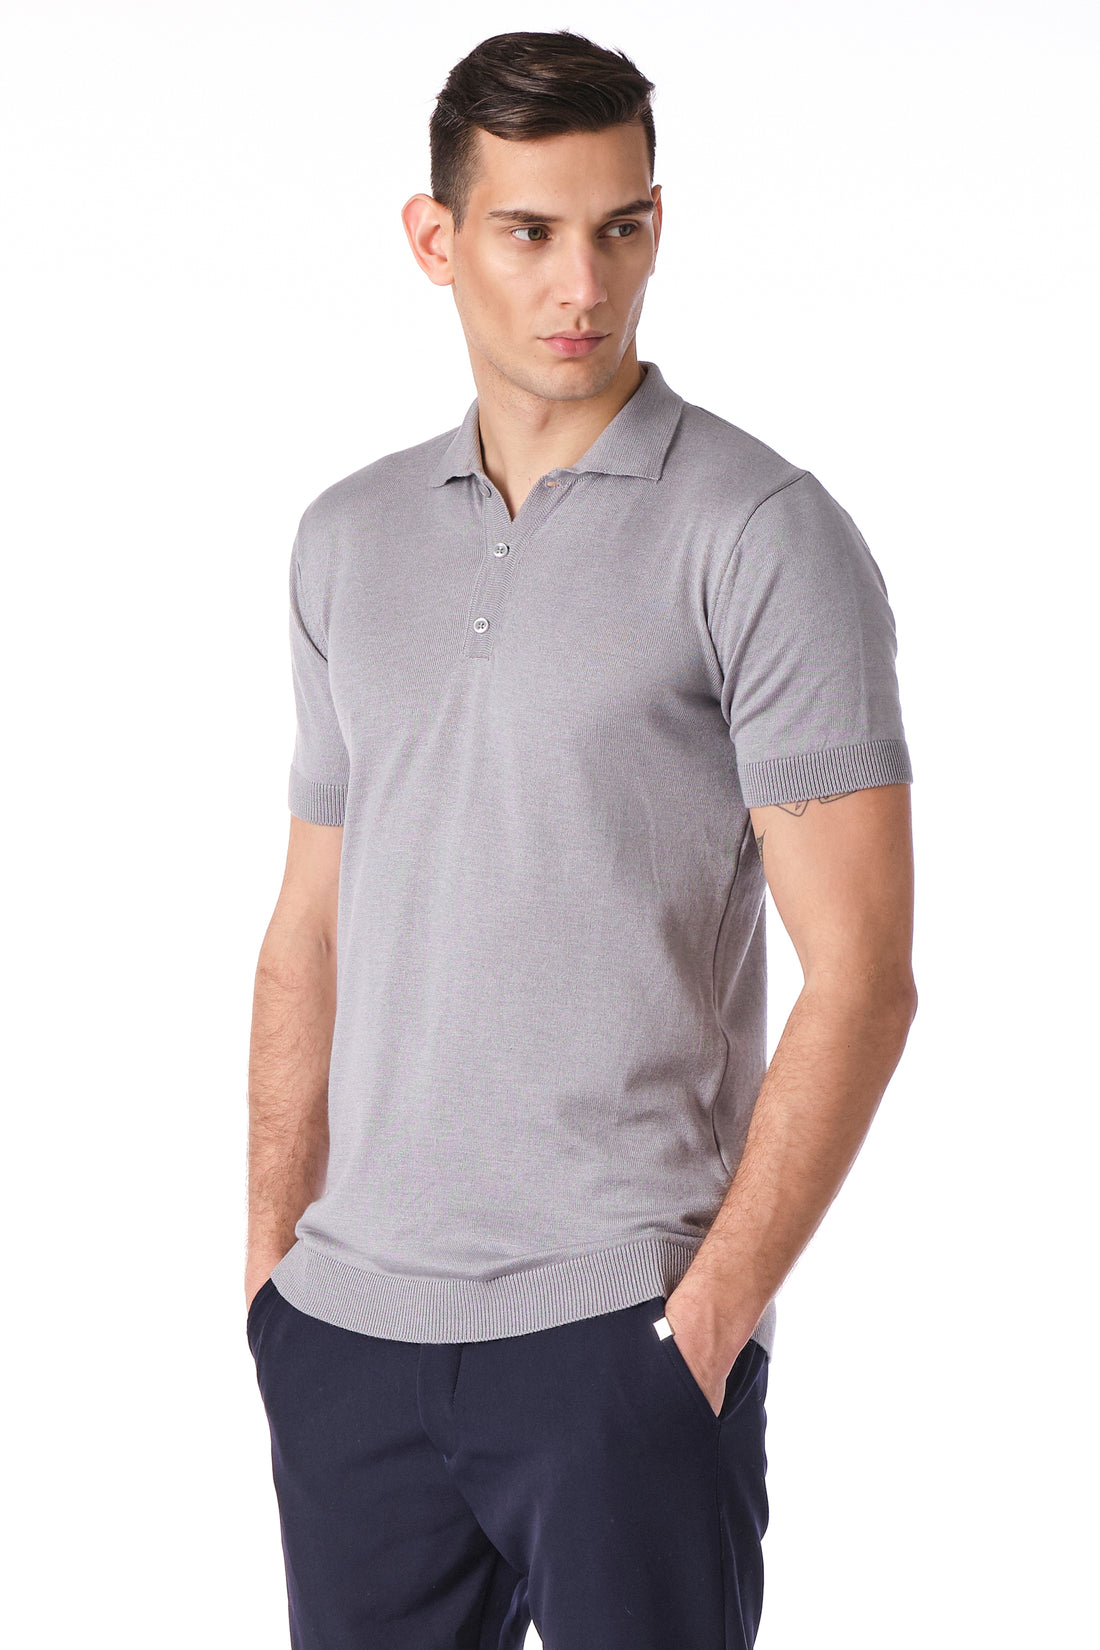 N° 6179 Knitted Polo Shirt  - Grey - Ron Tomson